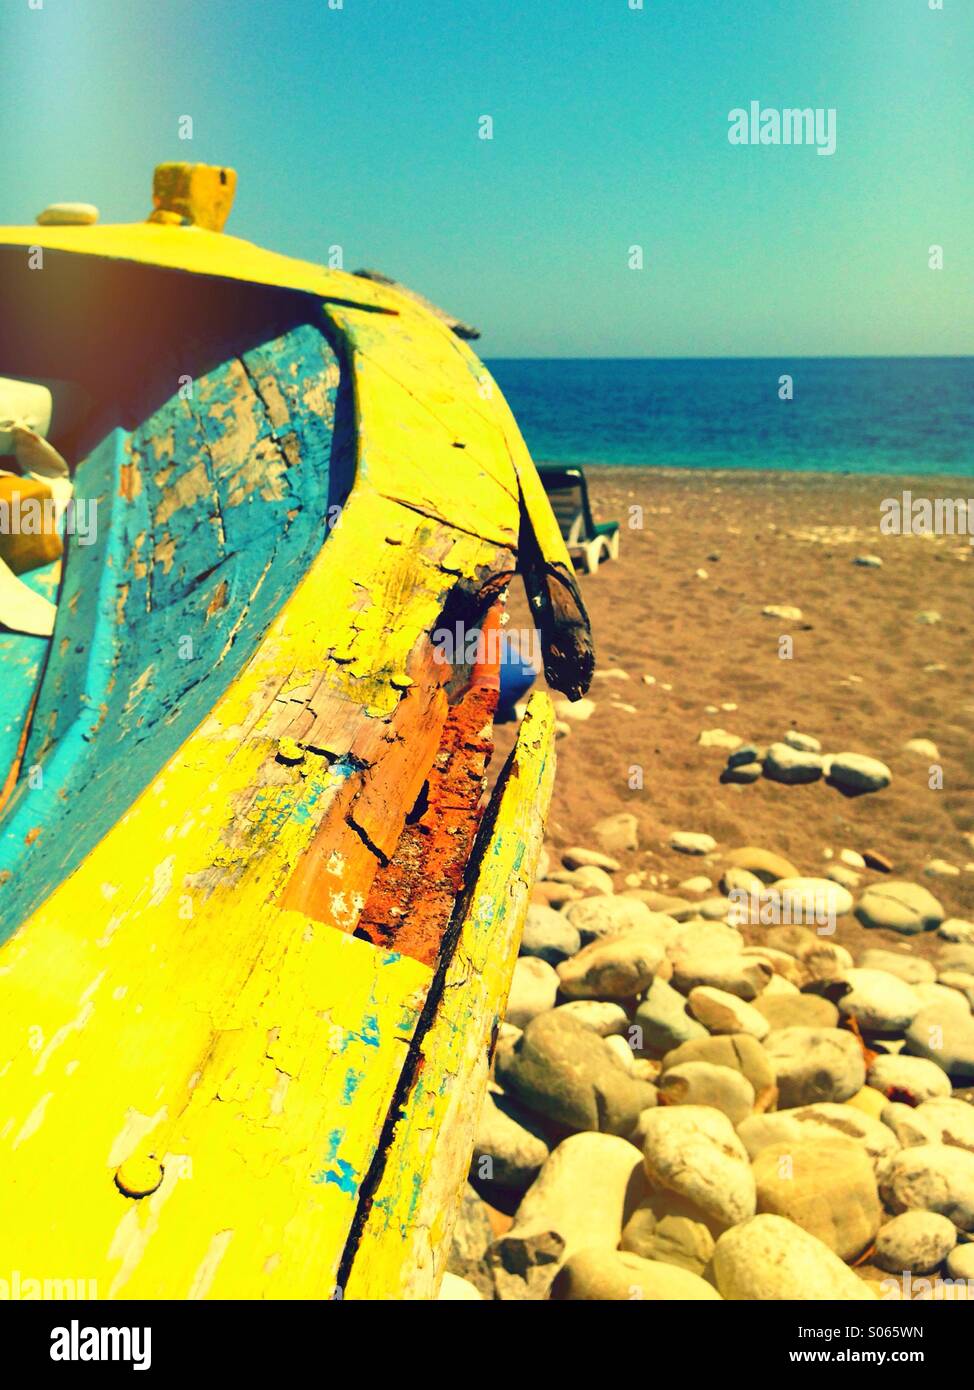 Vintage painted boat on a sand and pebble Mediterranean beach. Stock Photo